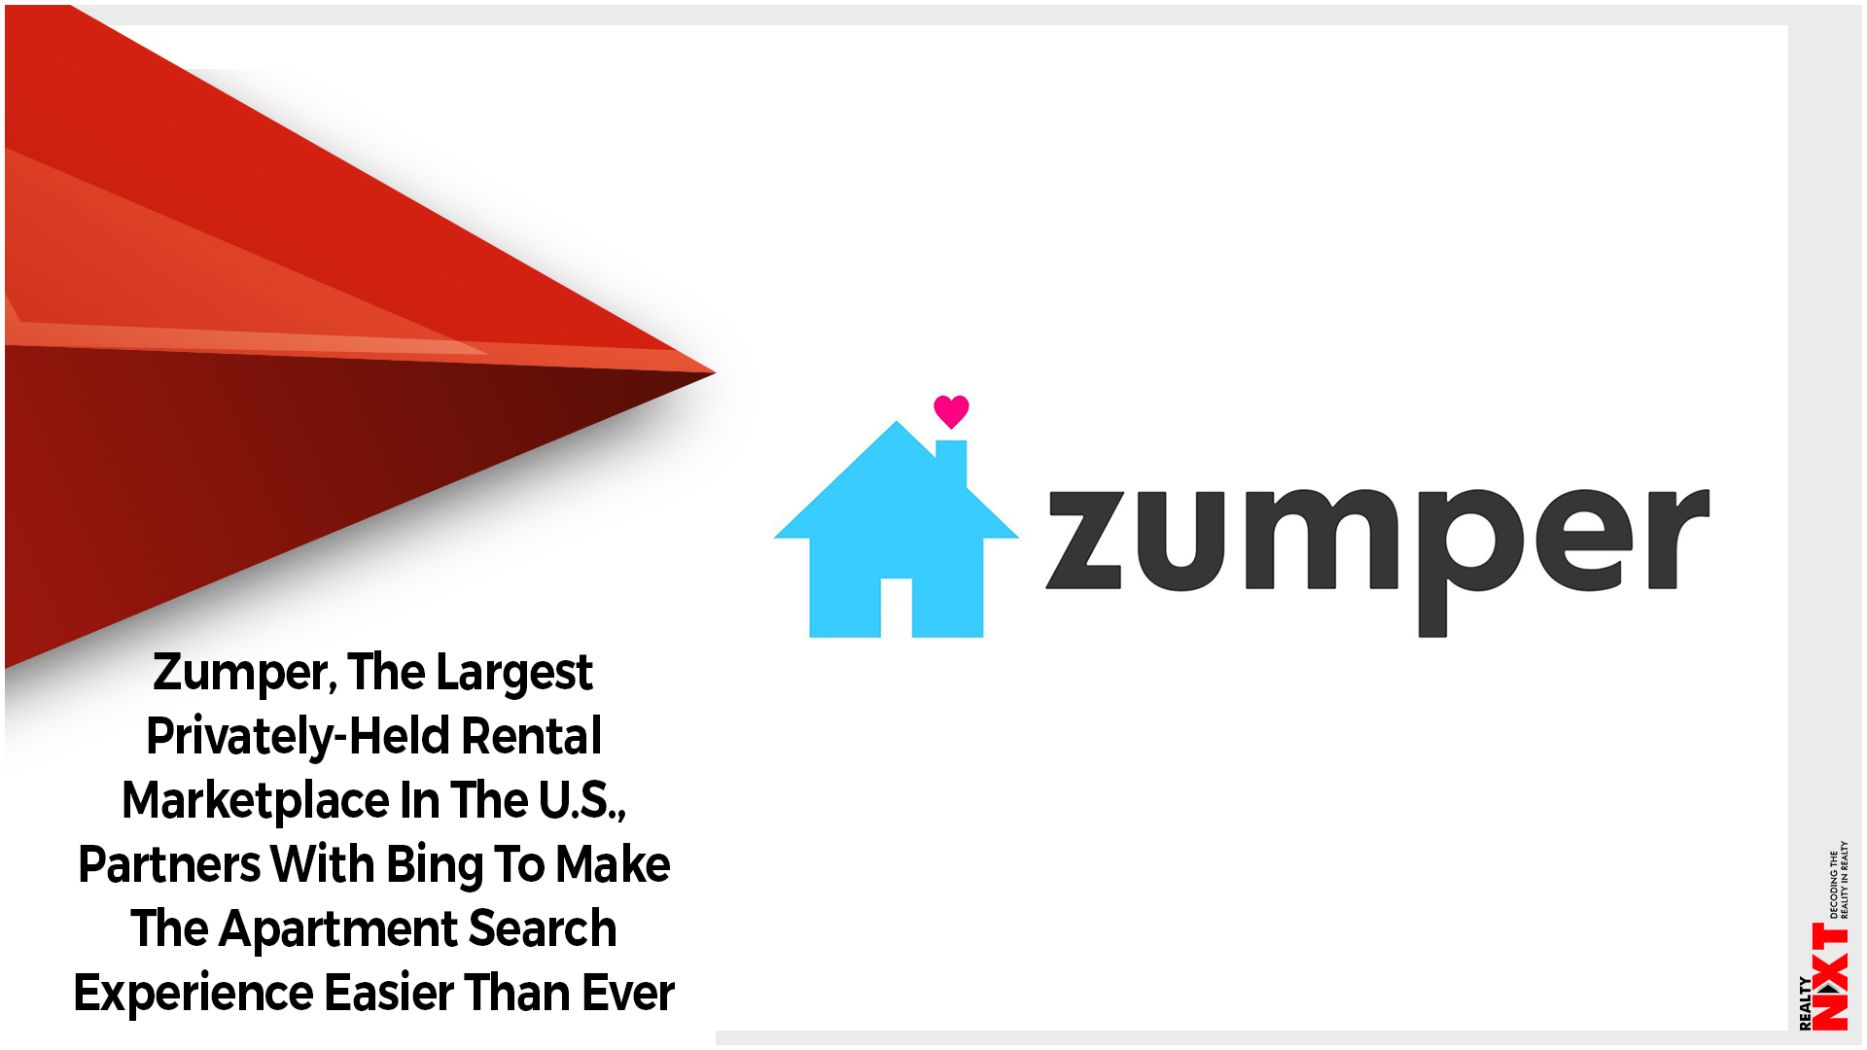 Zumper Partners With Bing To Make The Apartment Search Experience Easier